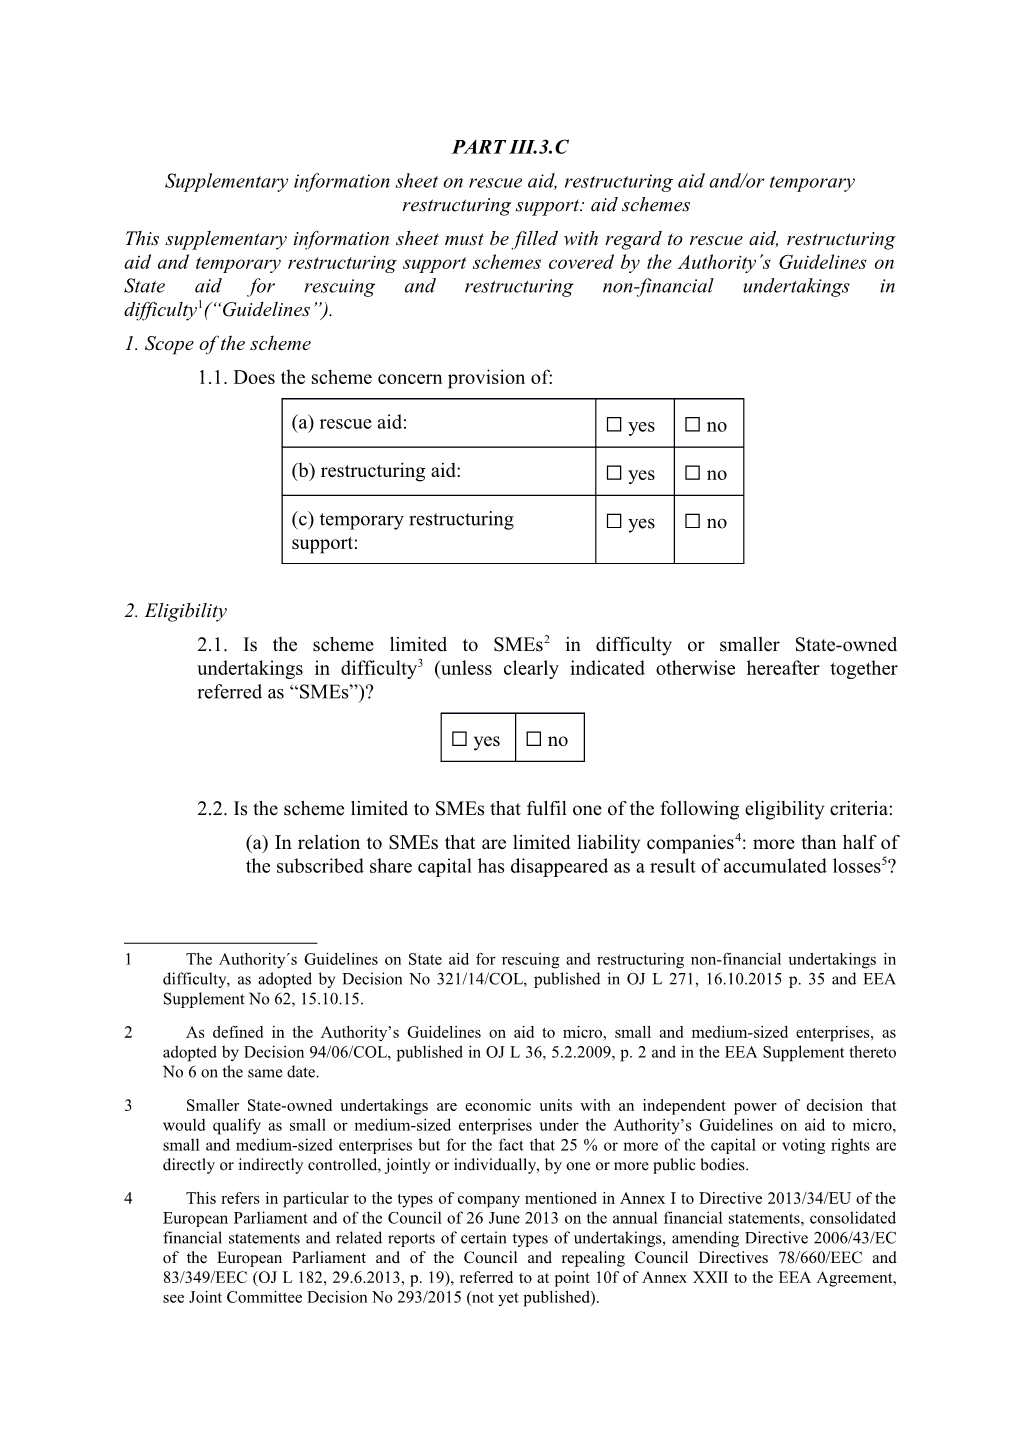 Supplementary Information Sheet on Rescue Aid, Restructuring Aid And/Or Temporary Restructuring